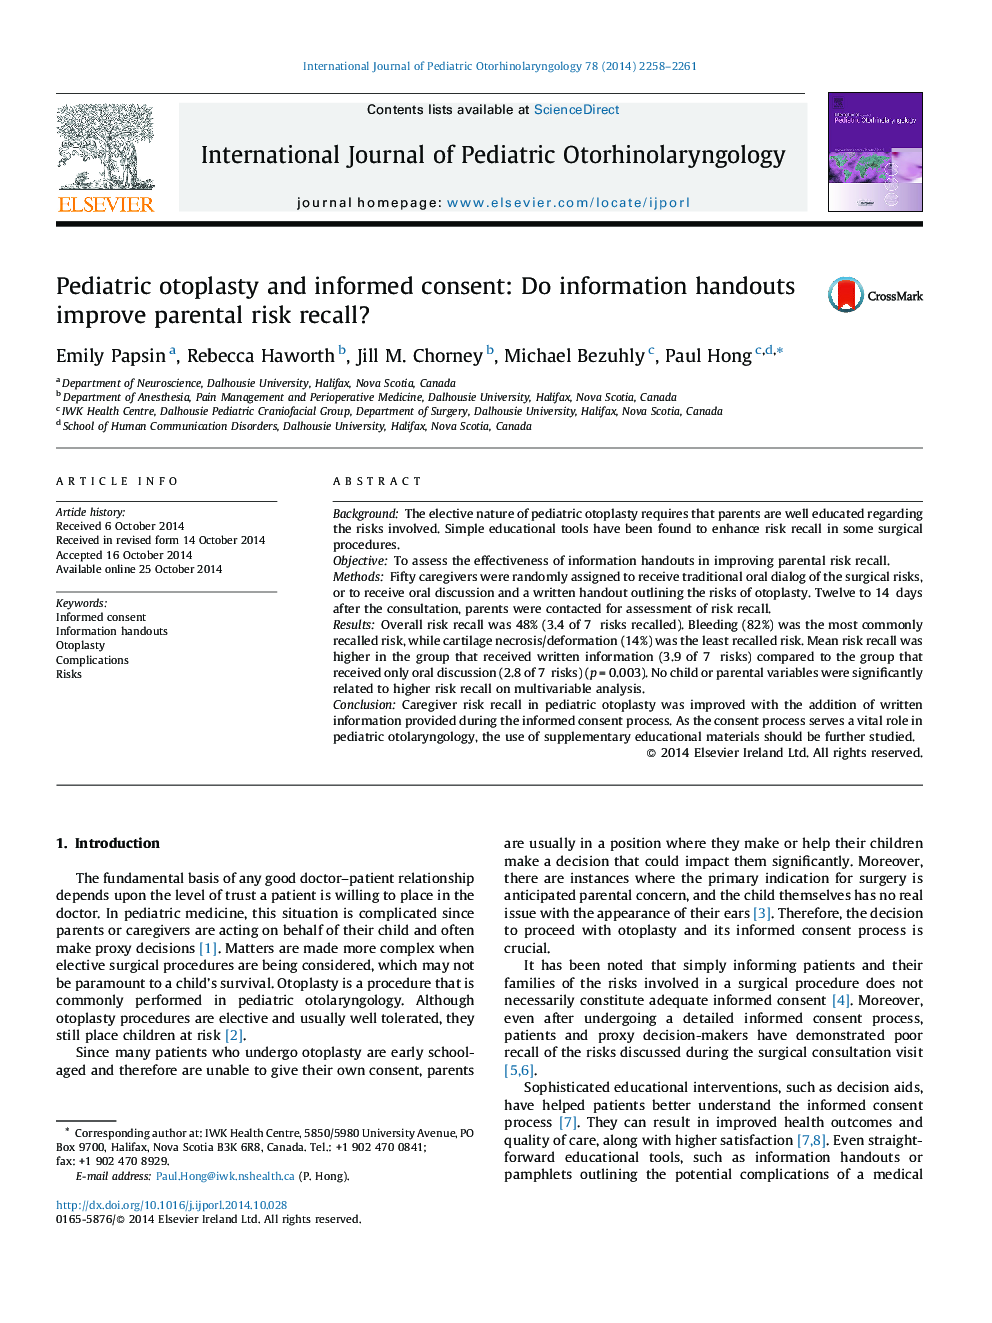 Pediatric otoplasty and informed consent: Do information handouts improve parental risk recall?